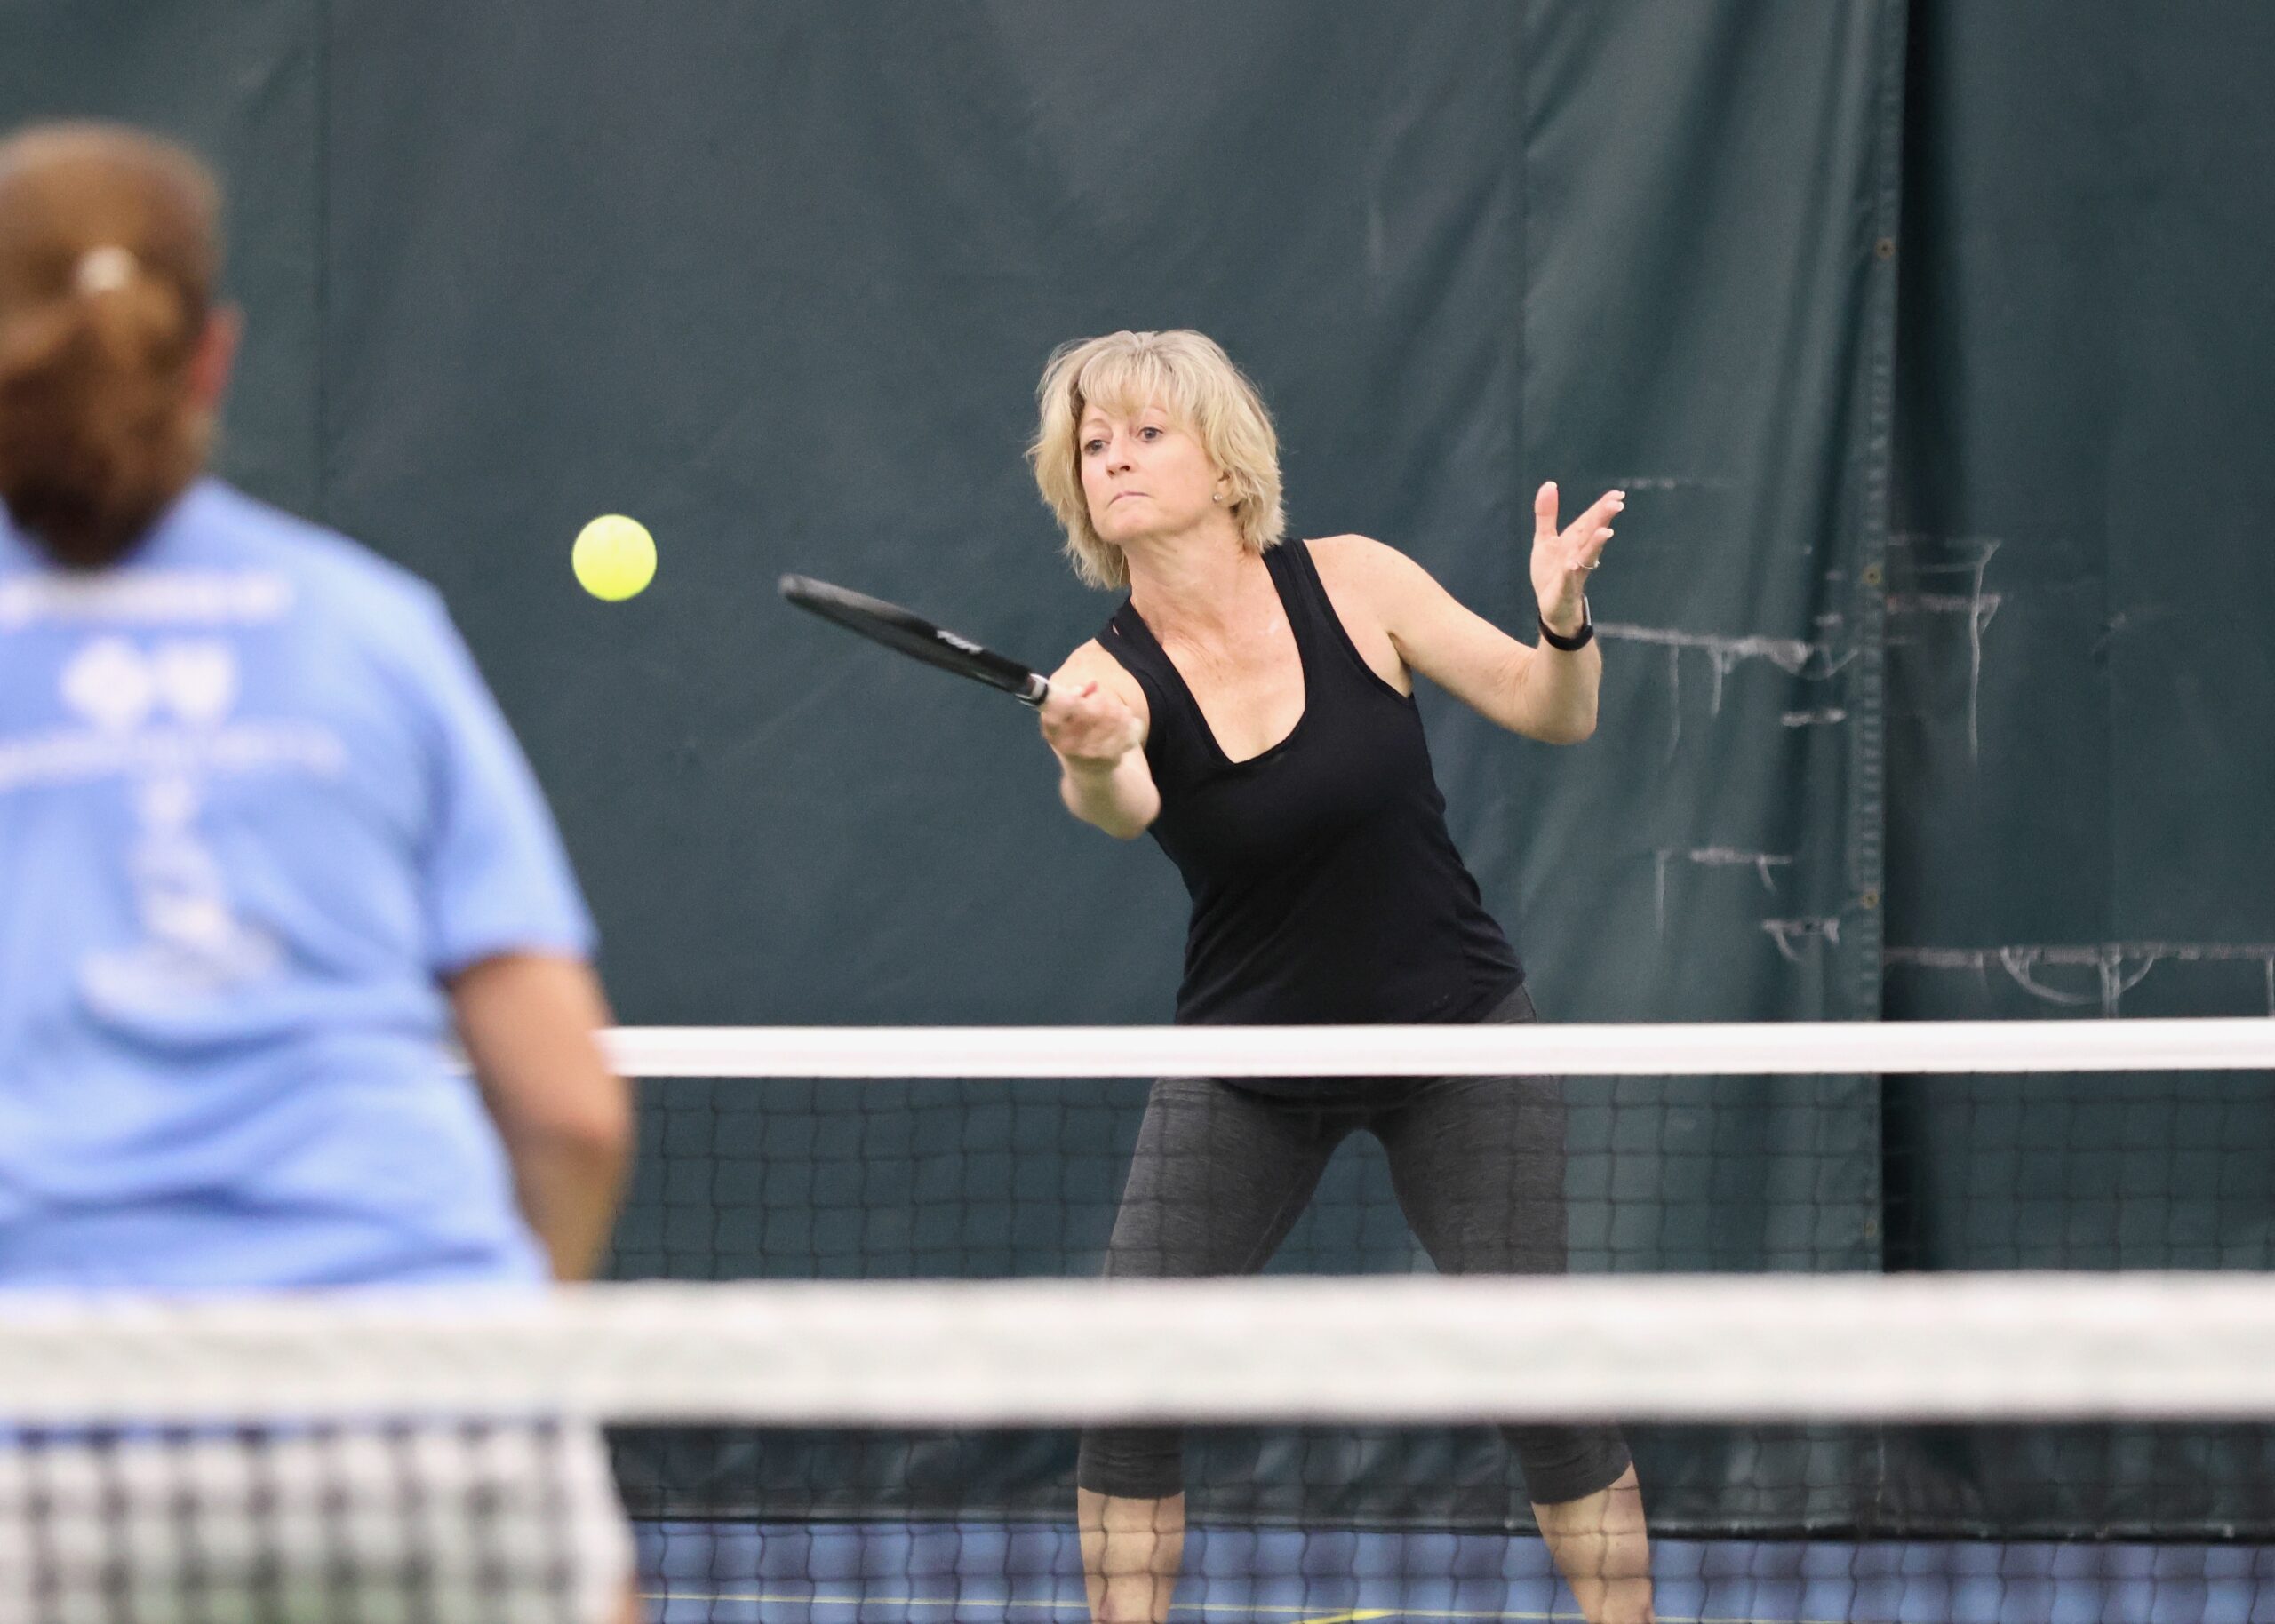 A woman in a black shirt hits the ball